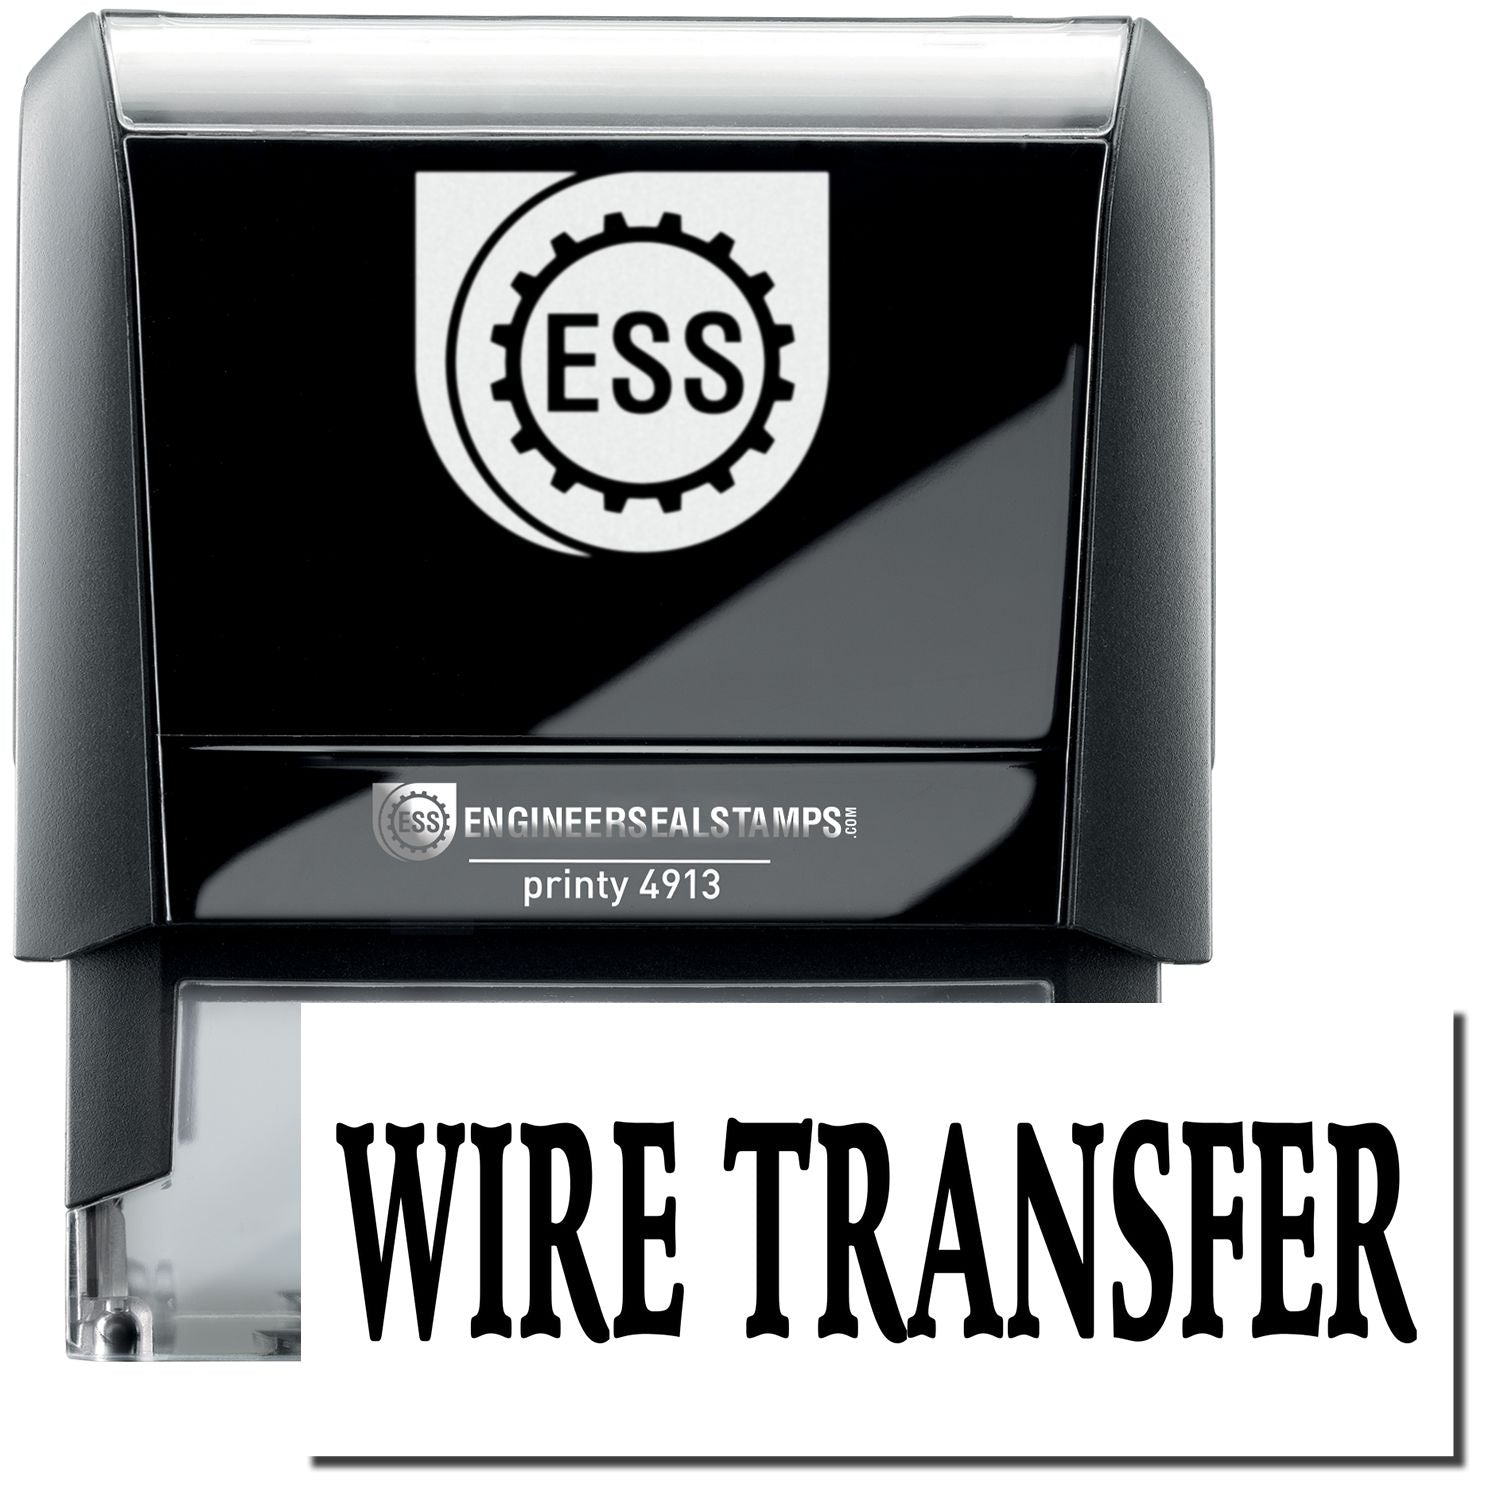 A self-inking stamp with a stamped image showing how the text "WIRE TRANSFER" in a large bold font is displayed by it.